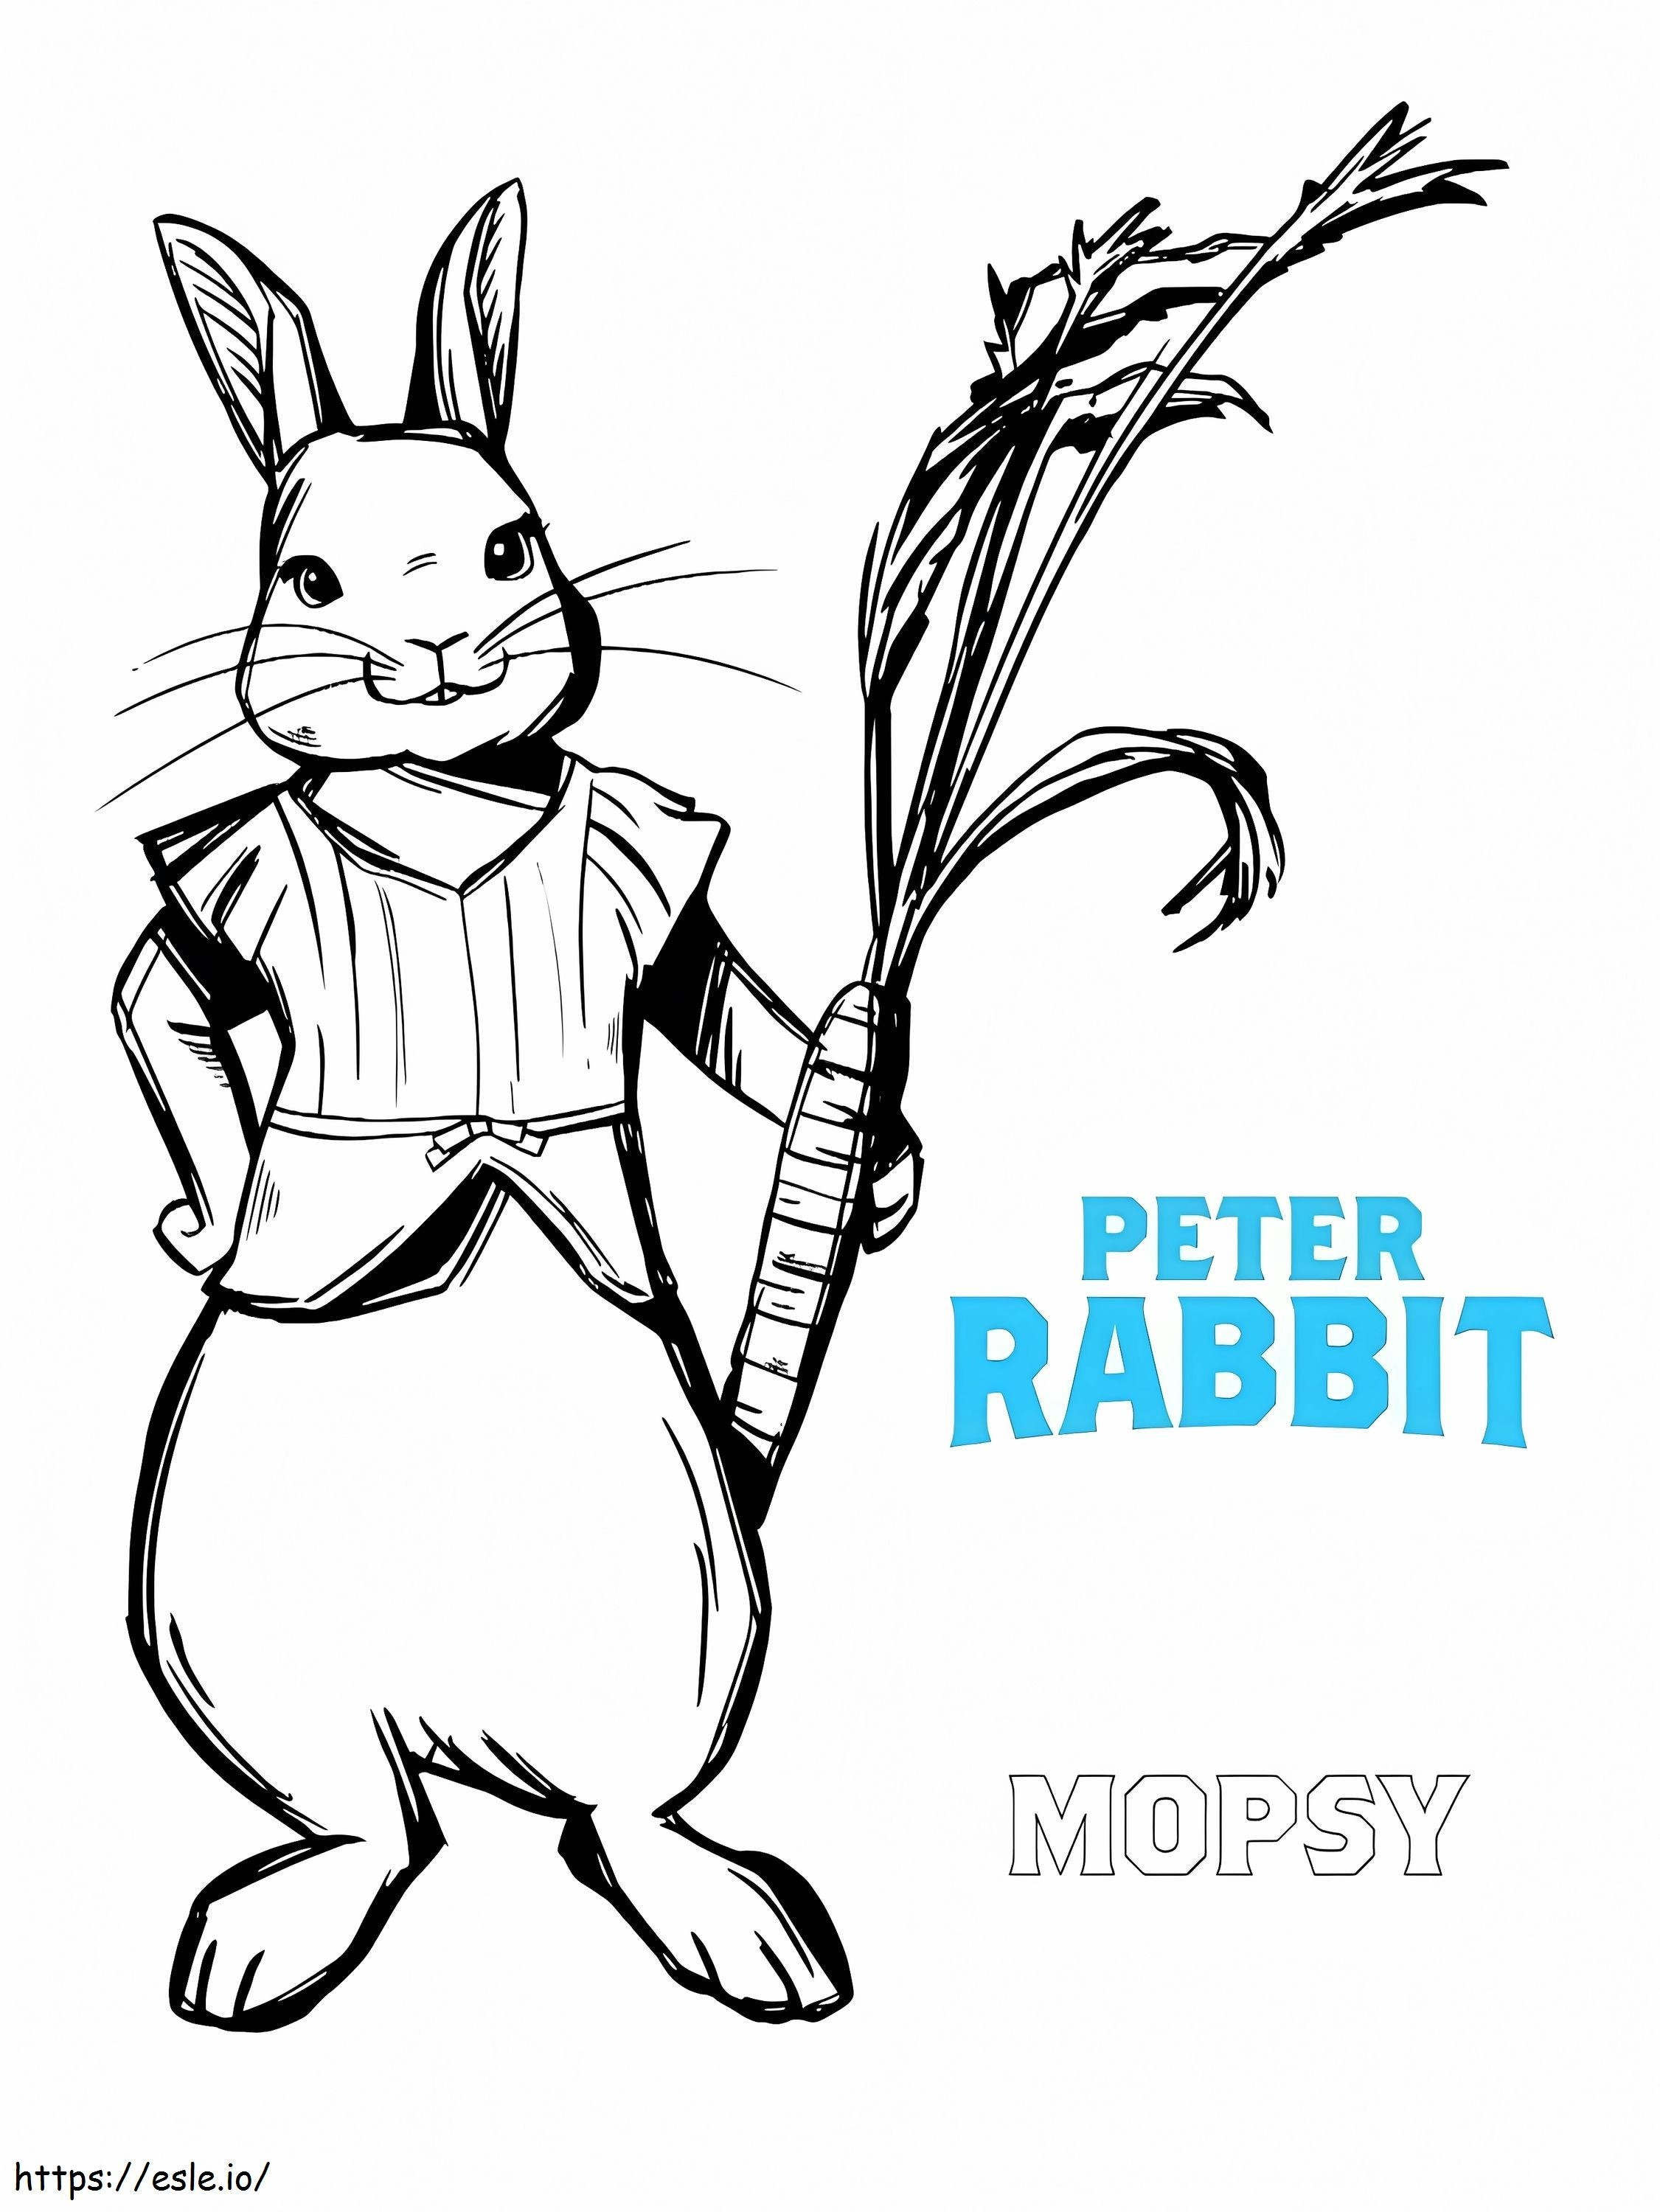 Coloring Realbbit Printable Squirrel Nutkin Rabbit Peter Free Images Proteussheet Co Outstanding Fresh Movie Yogi Bunny Color By Number Pictures To Print And Colour Easter Book coloring page